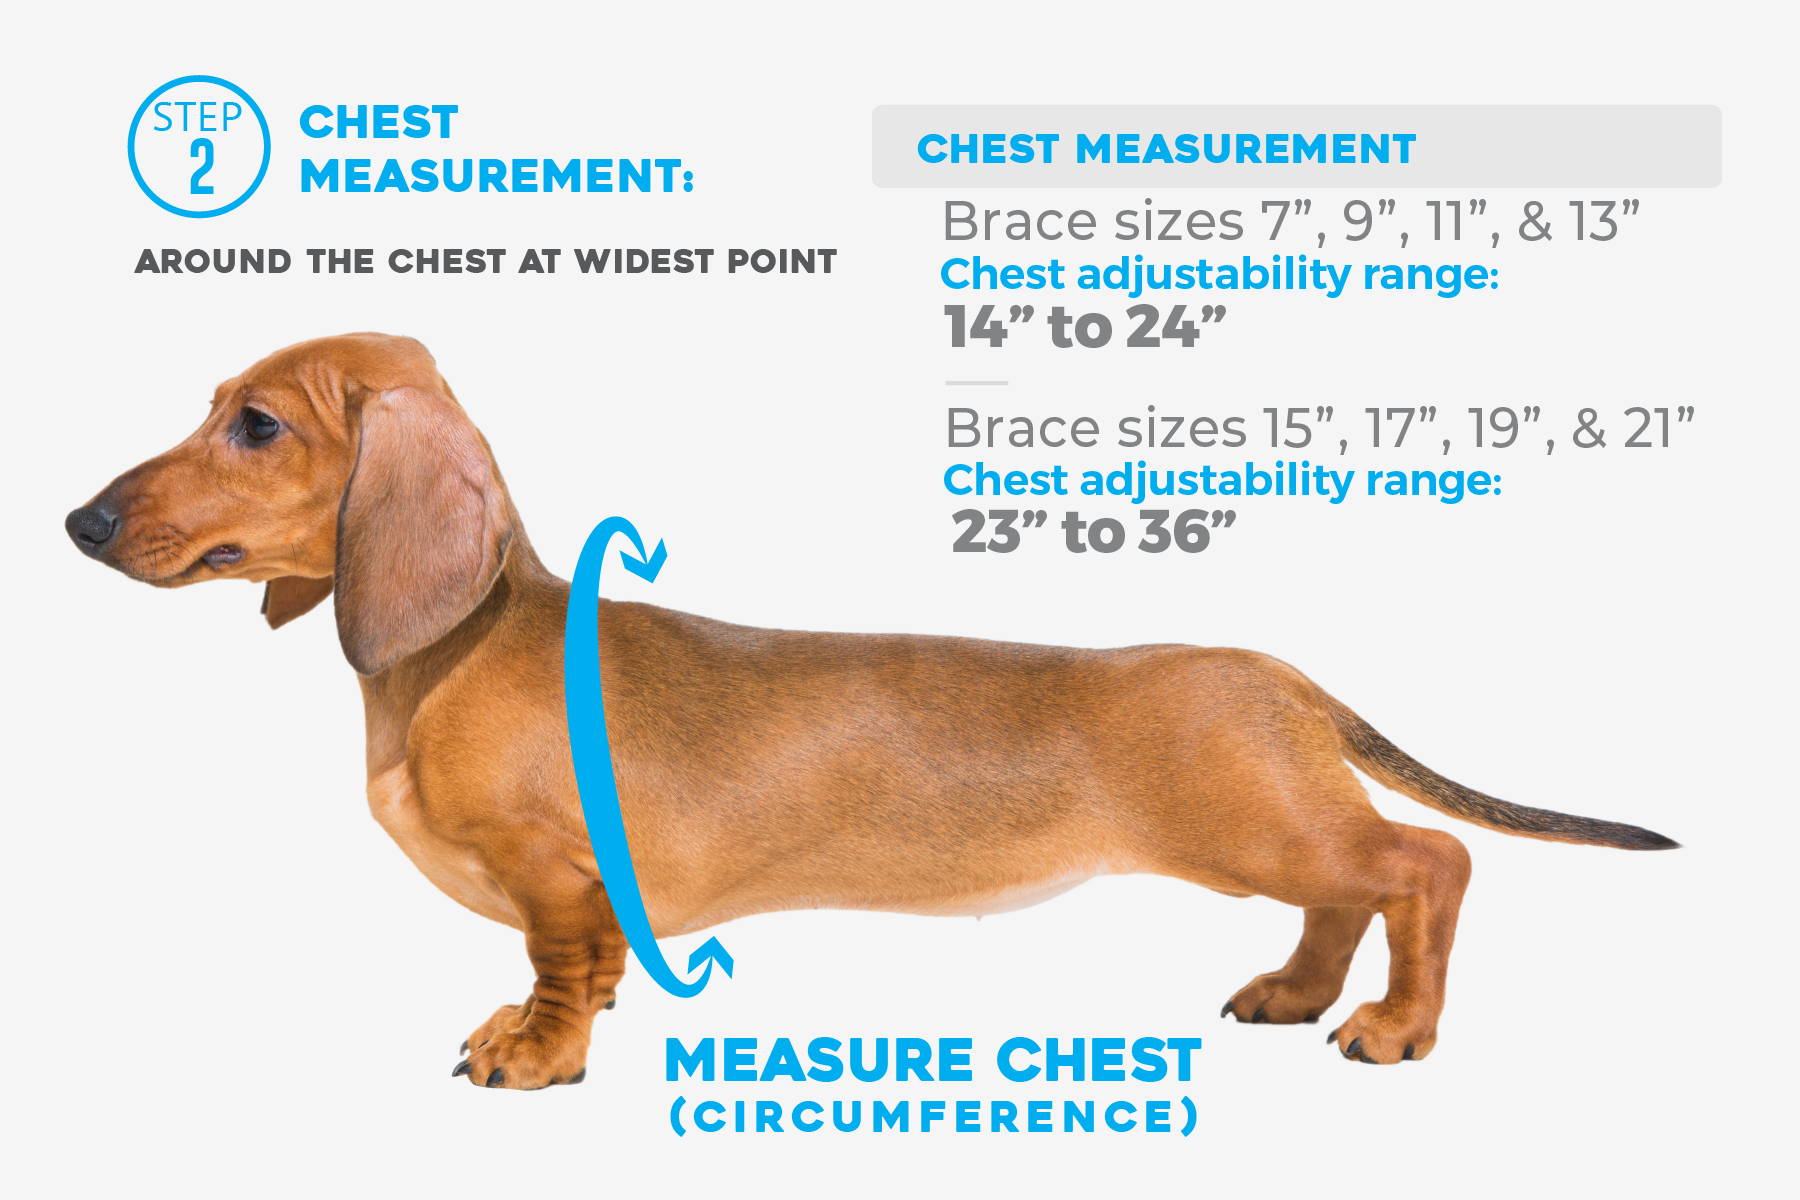 Chest Measurement and Sizing Chart for dog back brace